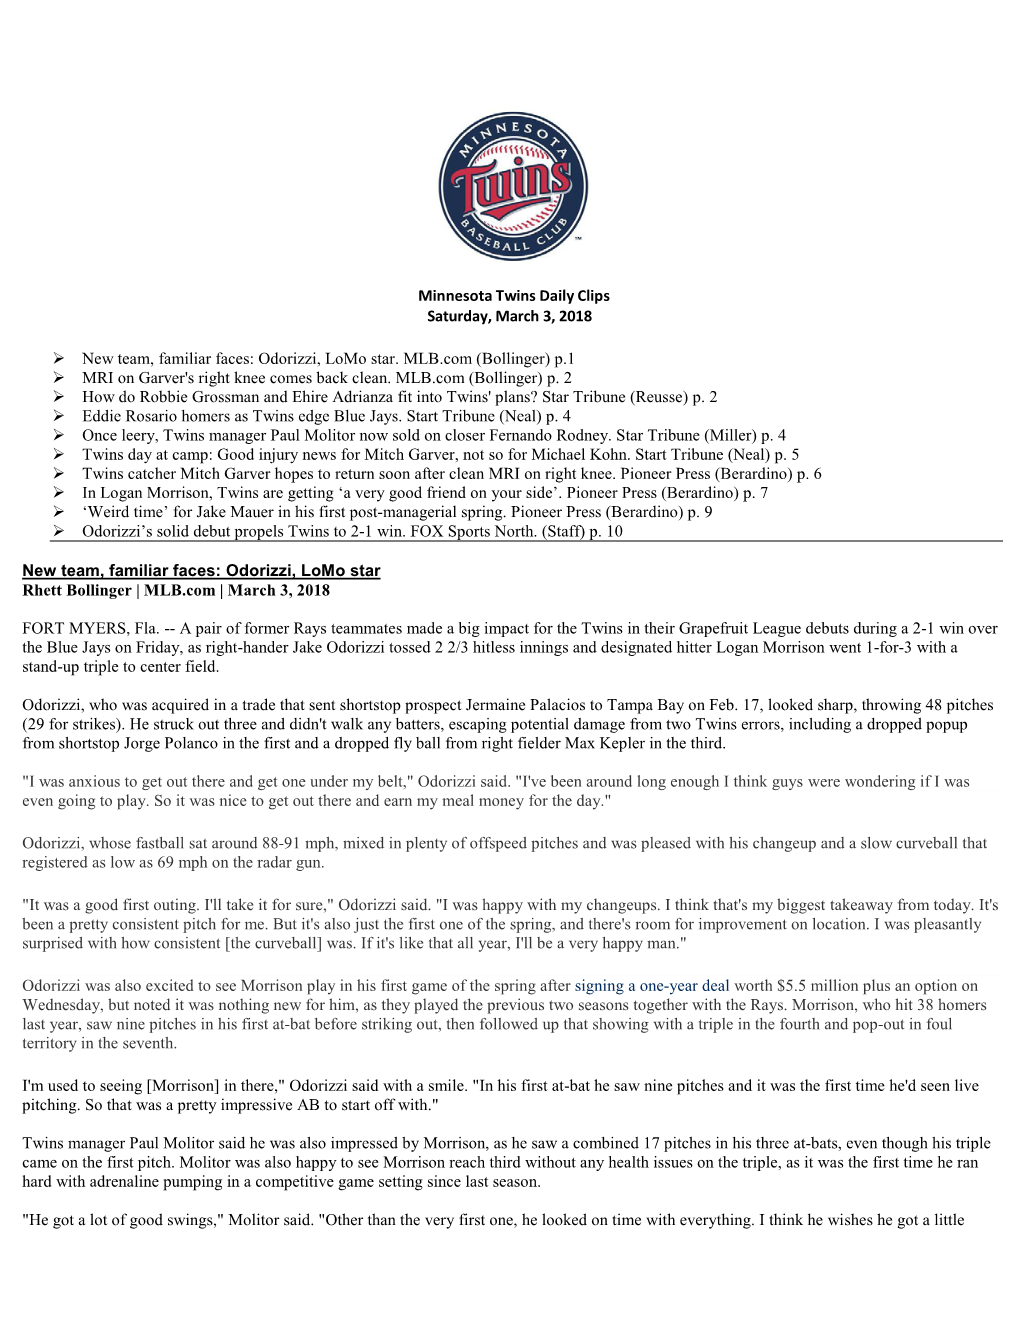 Minnesota Twins Daily Clips Saturday, March 3, 2018 New Team